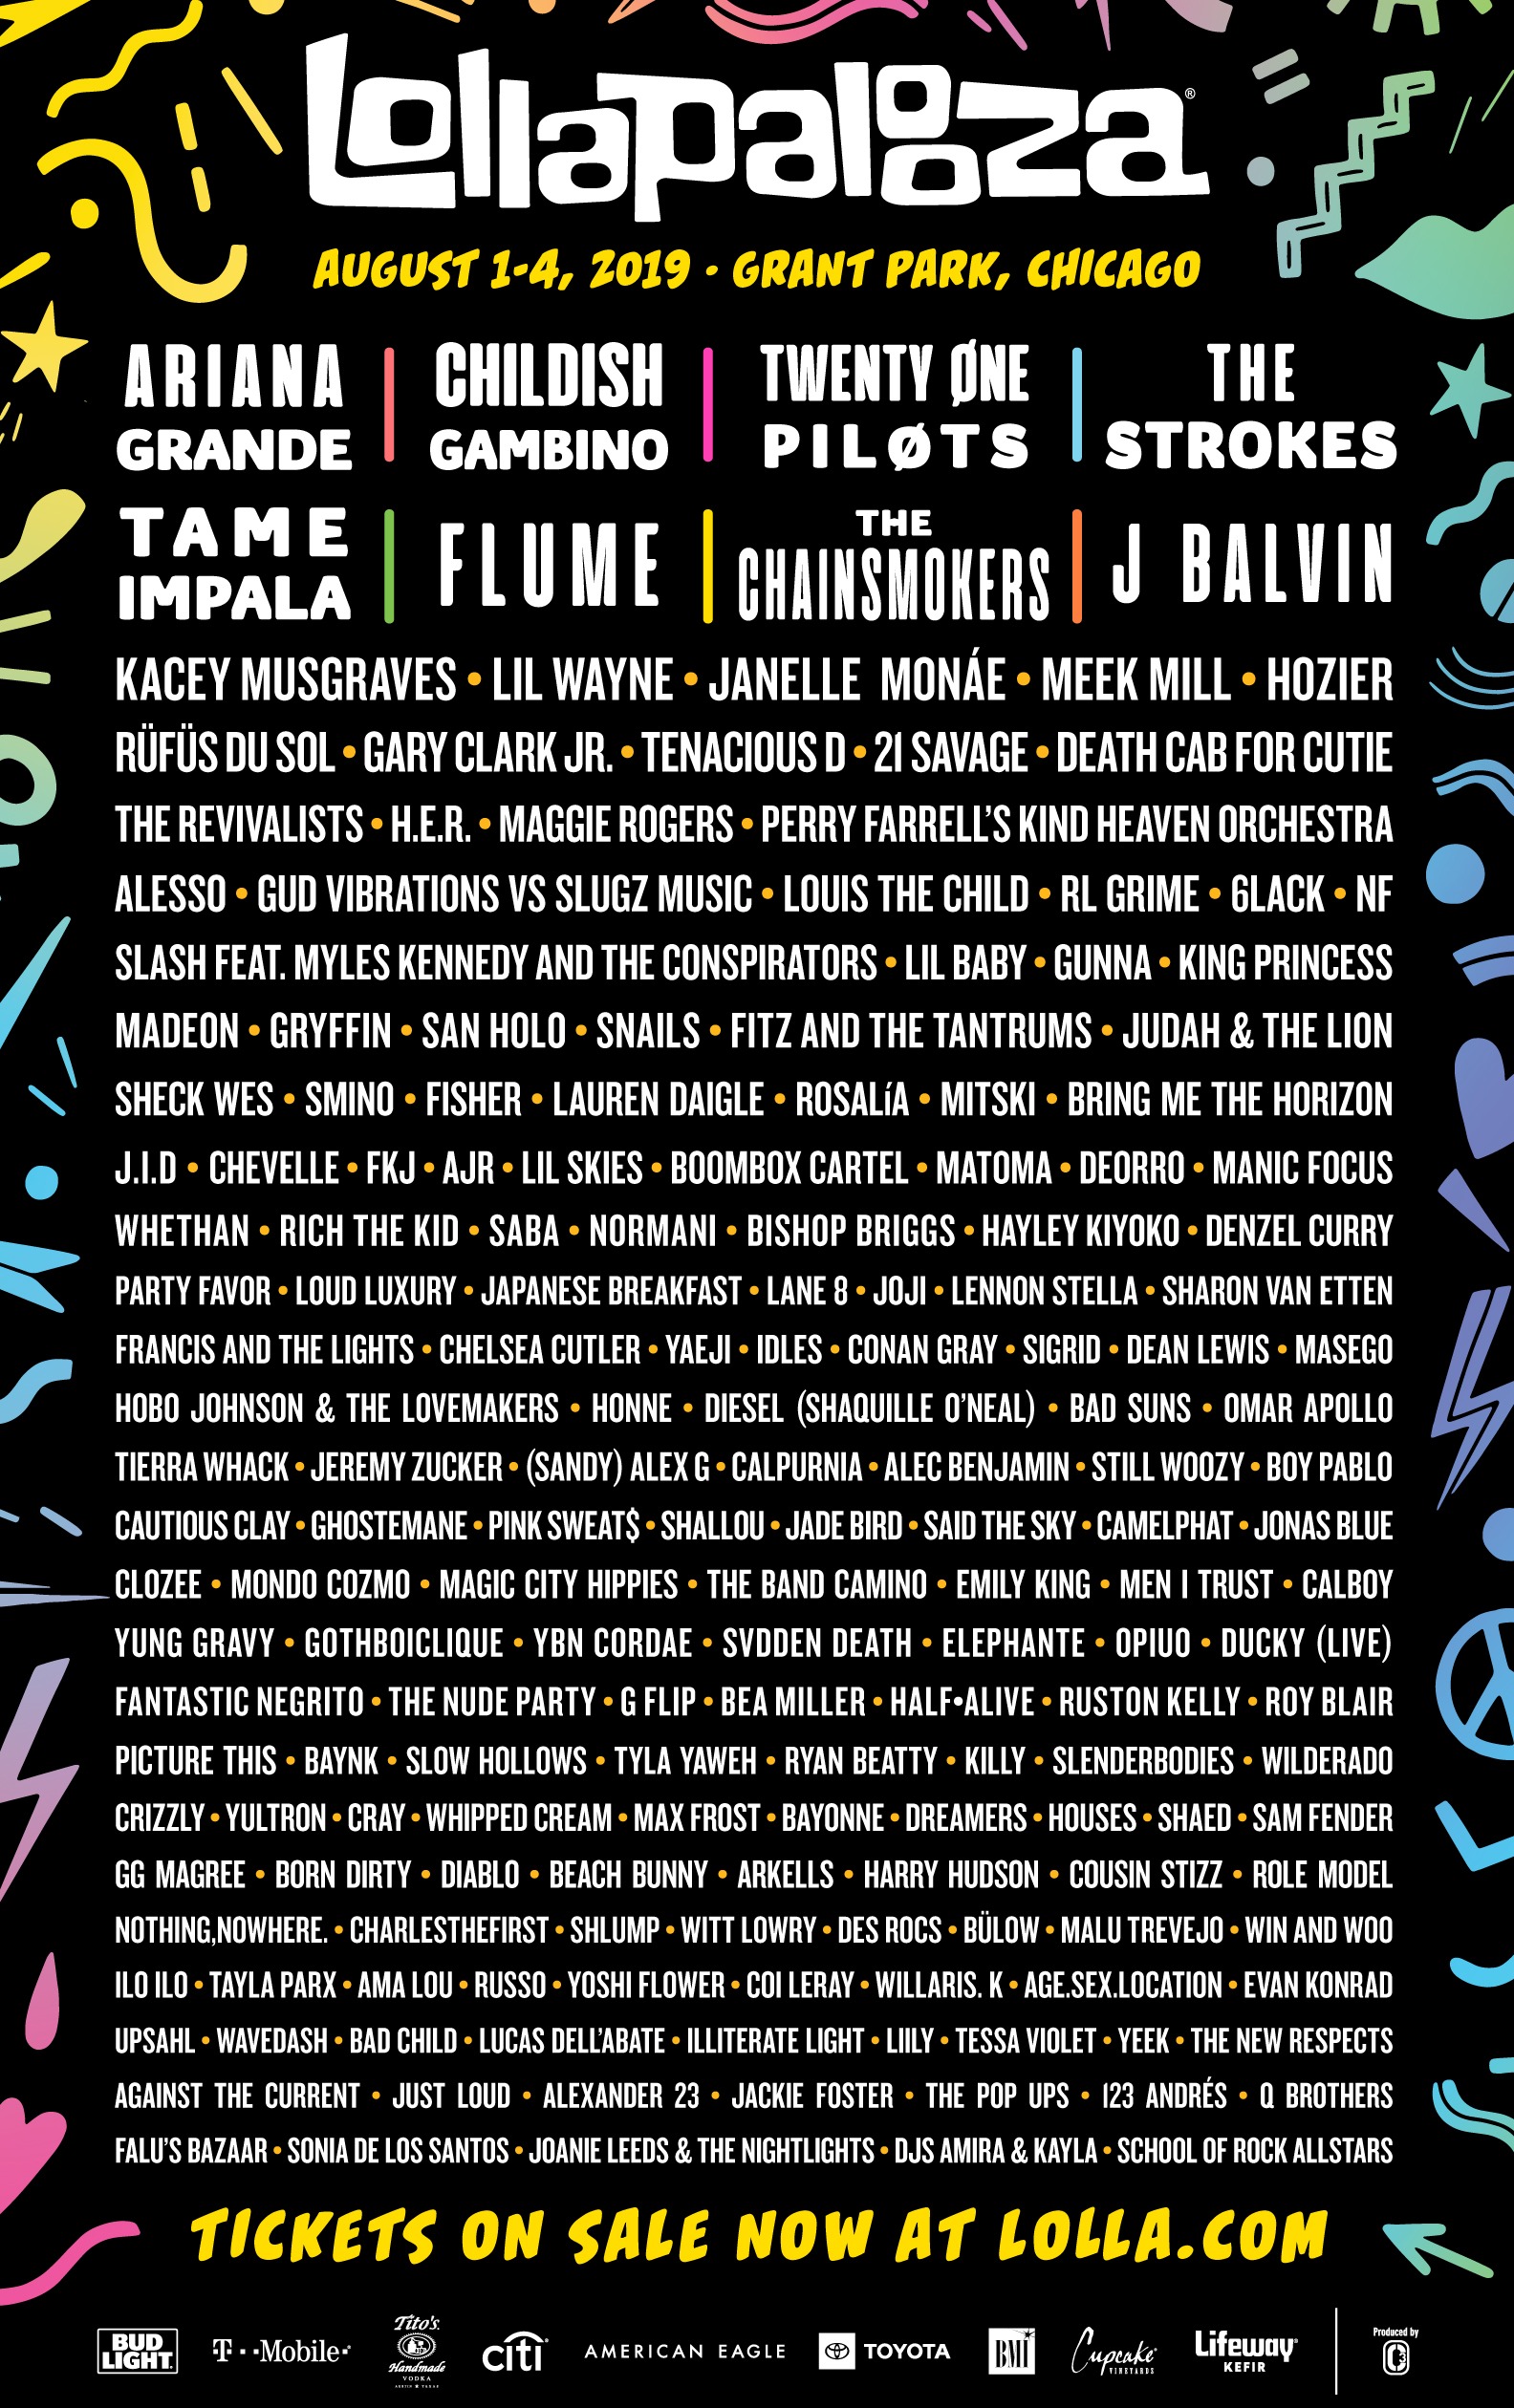 2020 Lollapalooza Chicago Festival / Lolla Lineup, Tickets and Dates